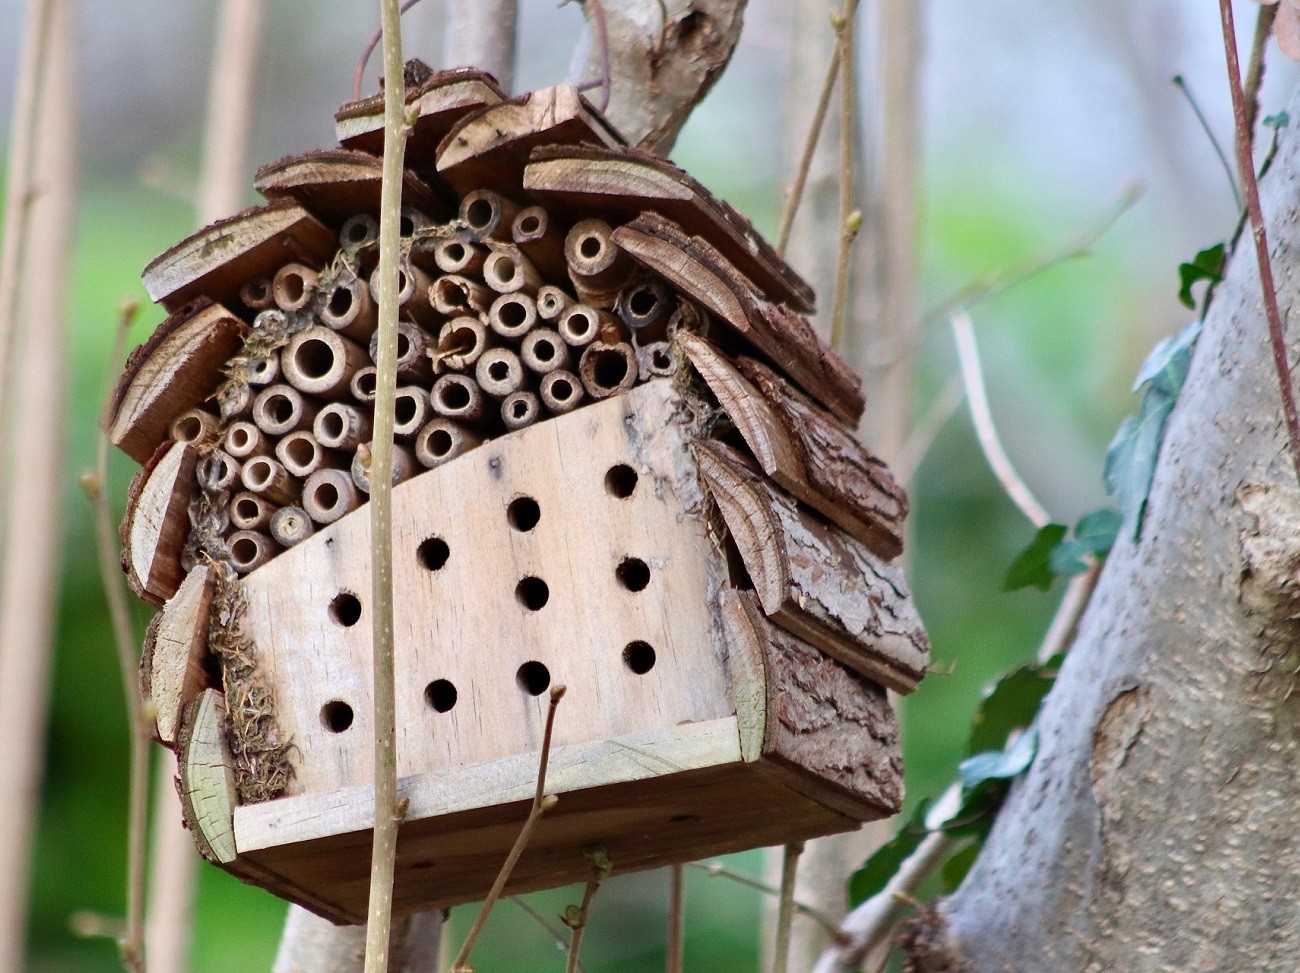 Insect Hotel in a garden